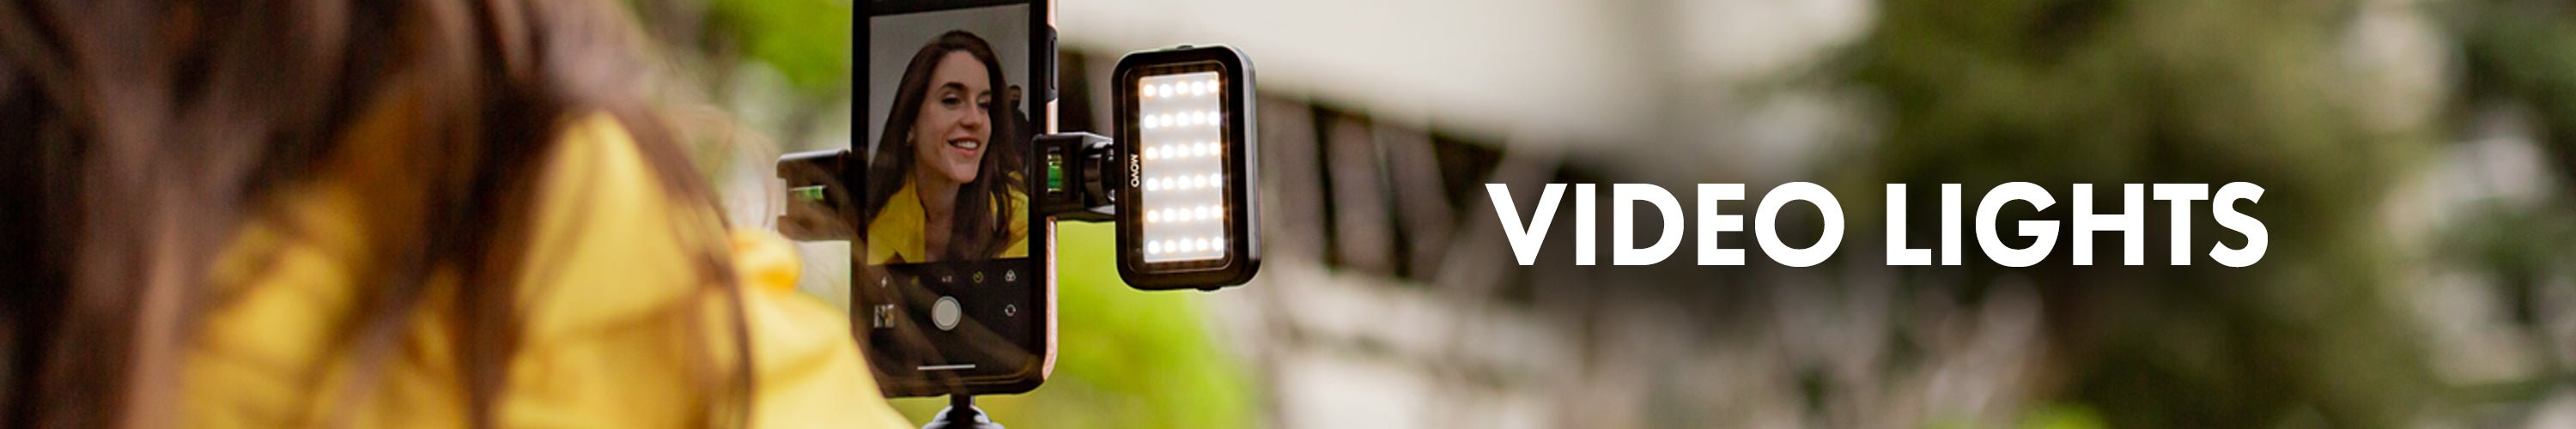 LED Video Lights for Cameras & More - Movo